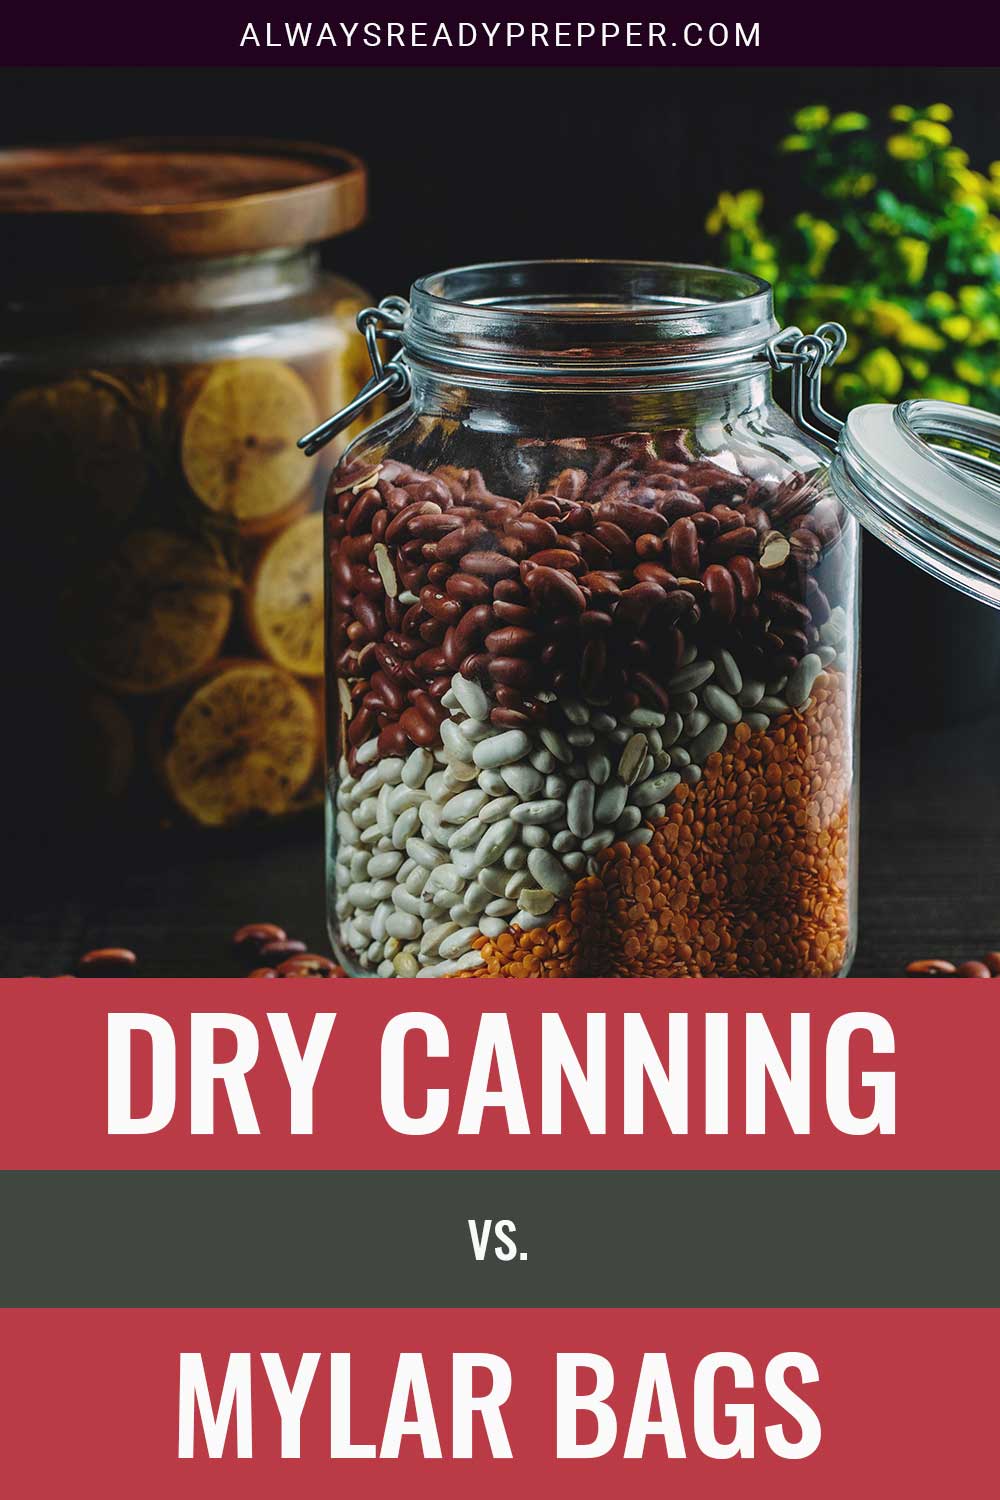 A Glass jar with beans and seeds in it - Dry Canning vs. Mylar Bags.